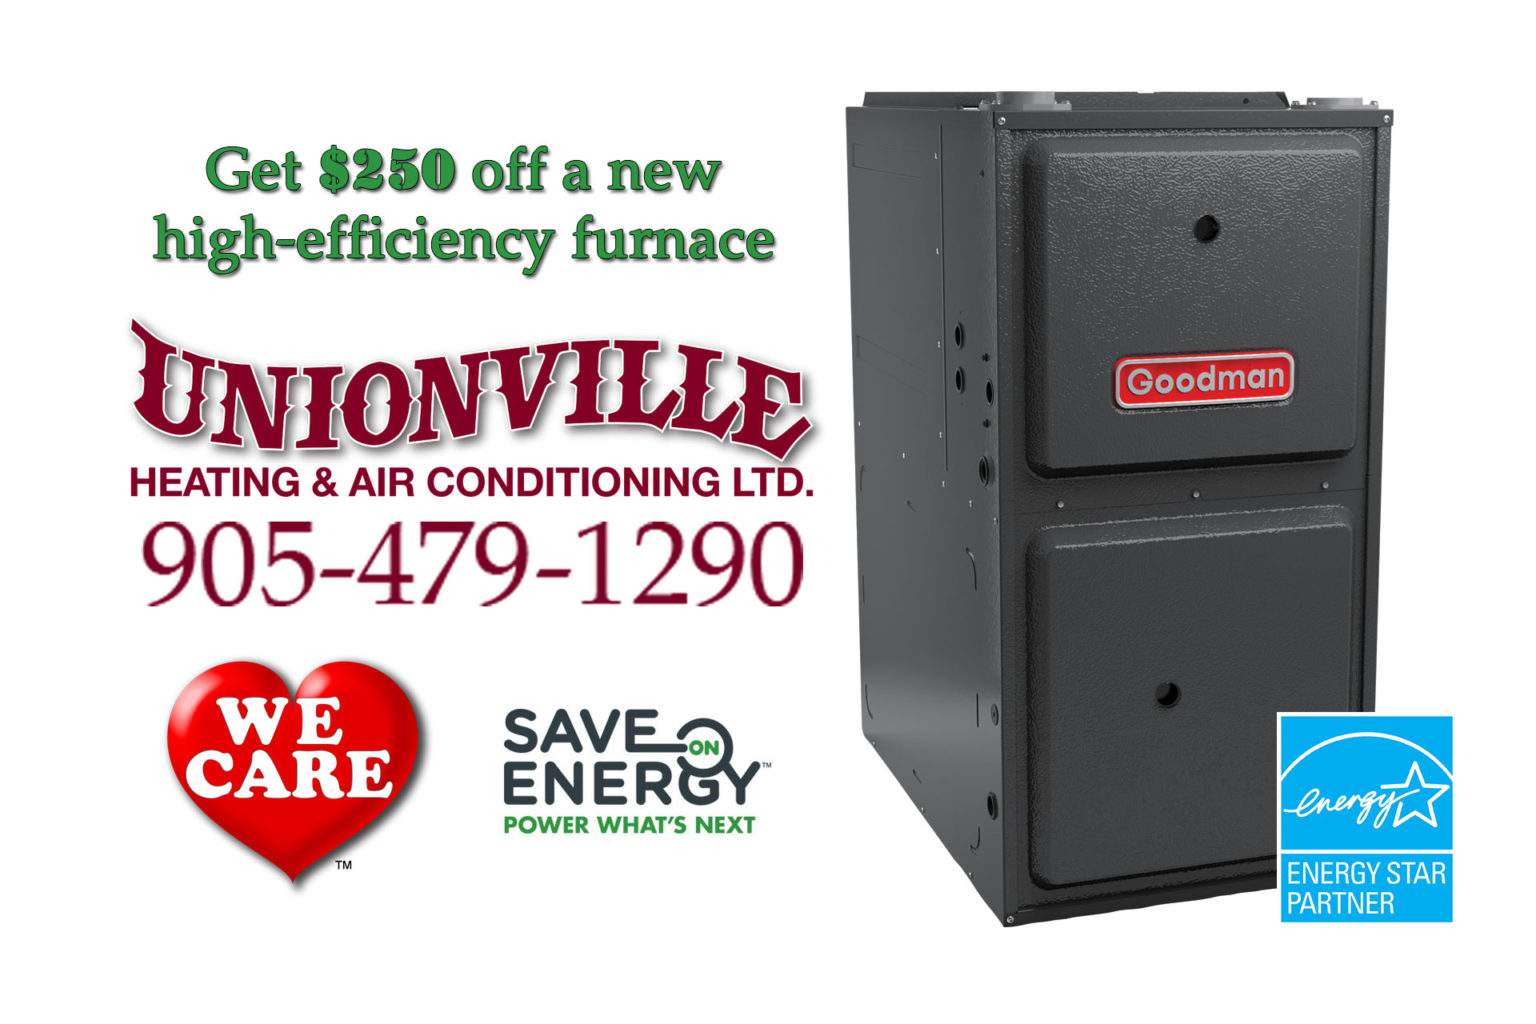 Time for a new furnace? Unionville Heating and Air Conditioning Ltd.